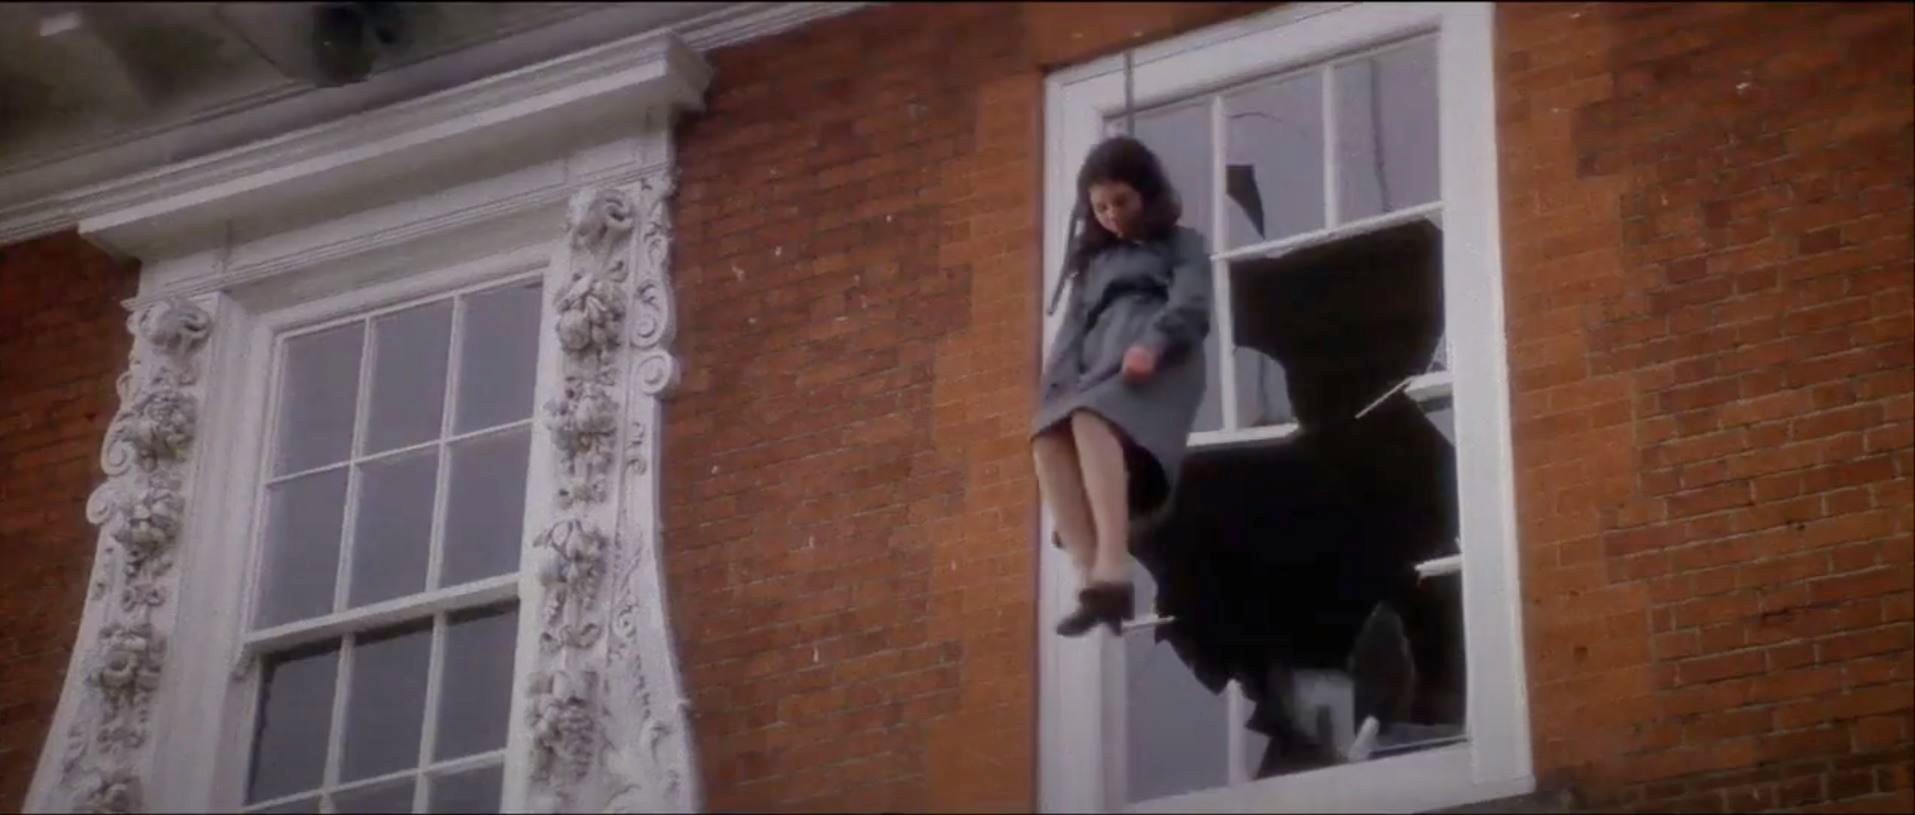 A nanny hangs from a noose in The Omen.